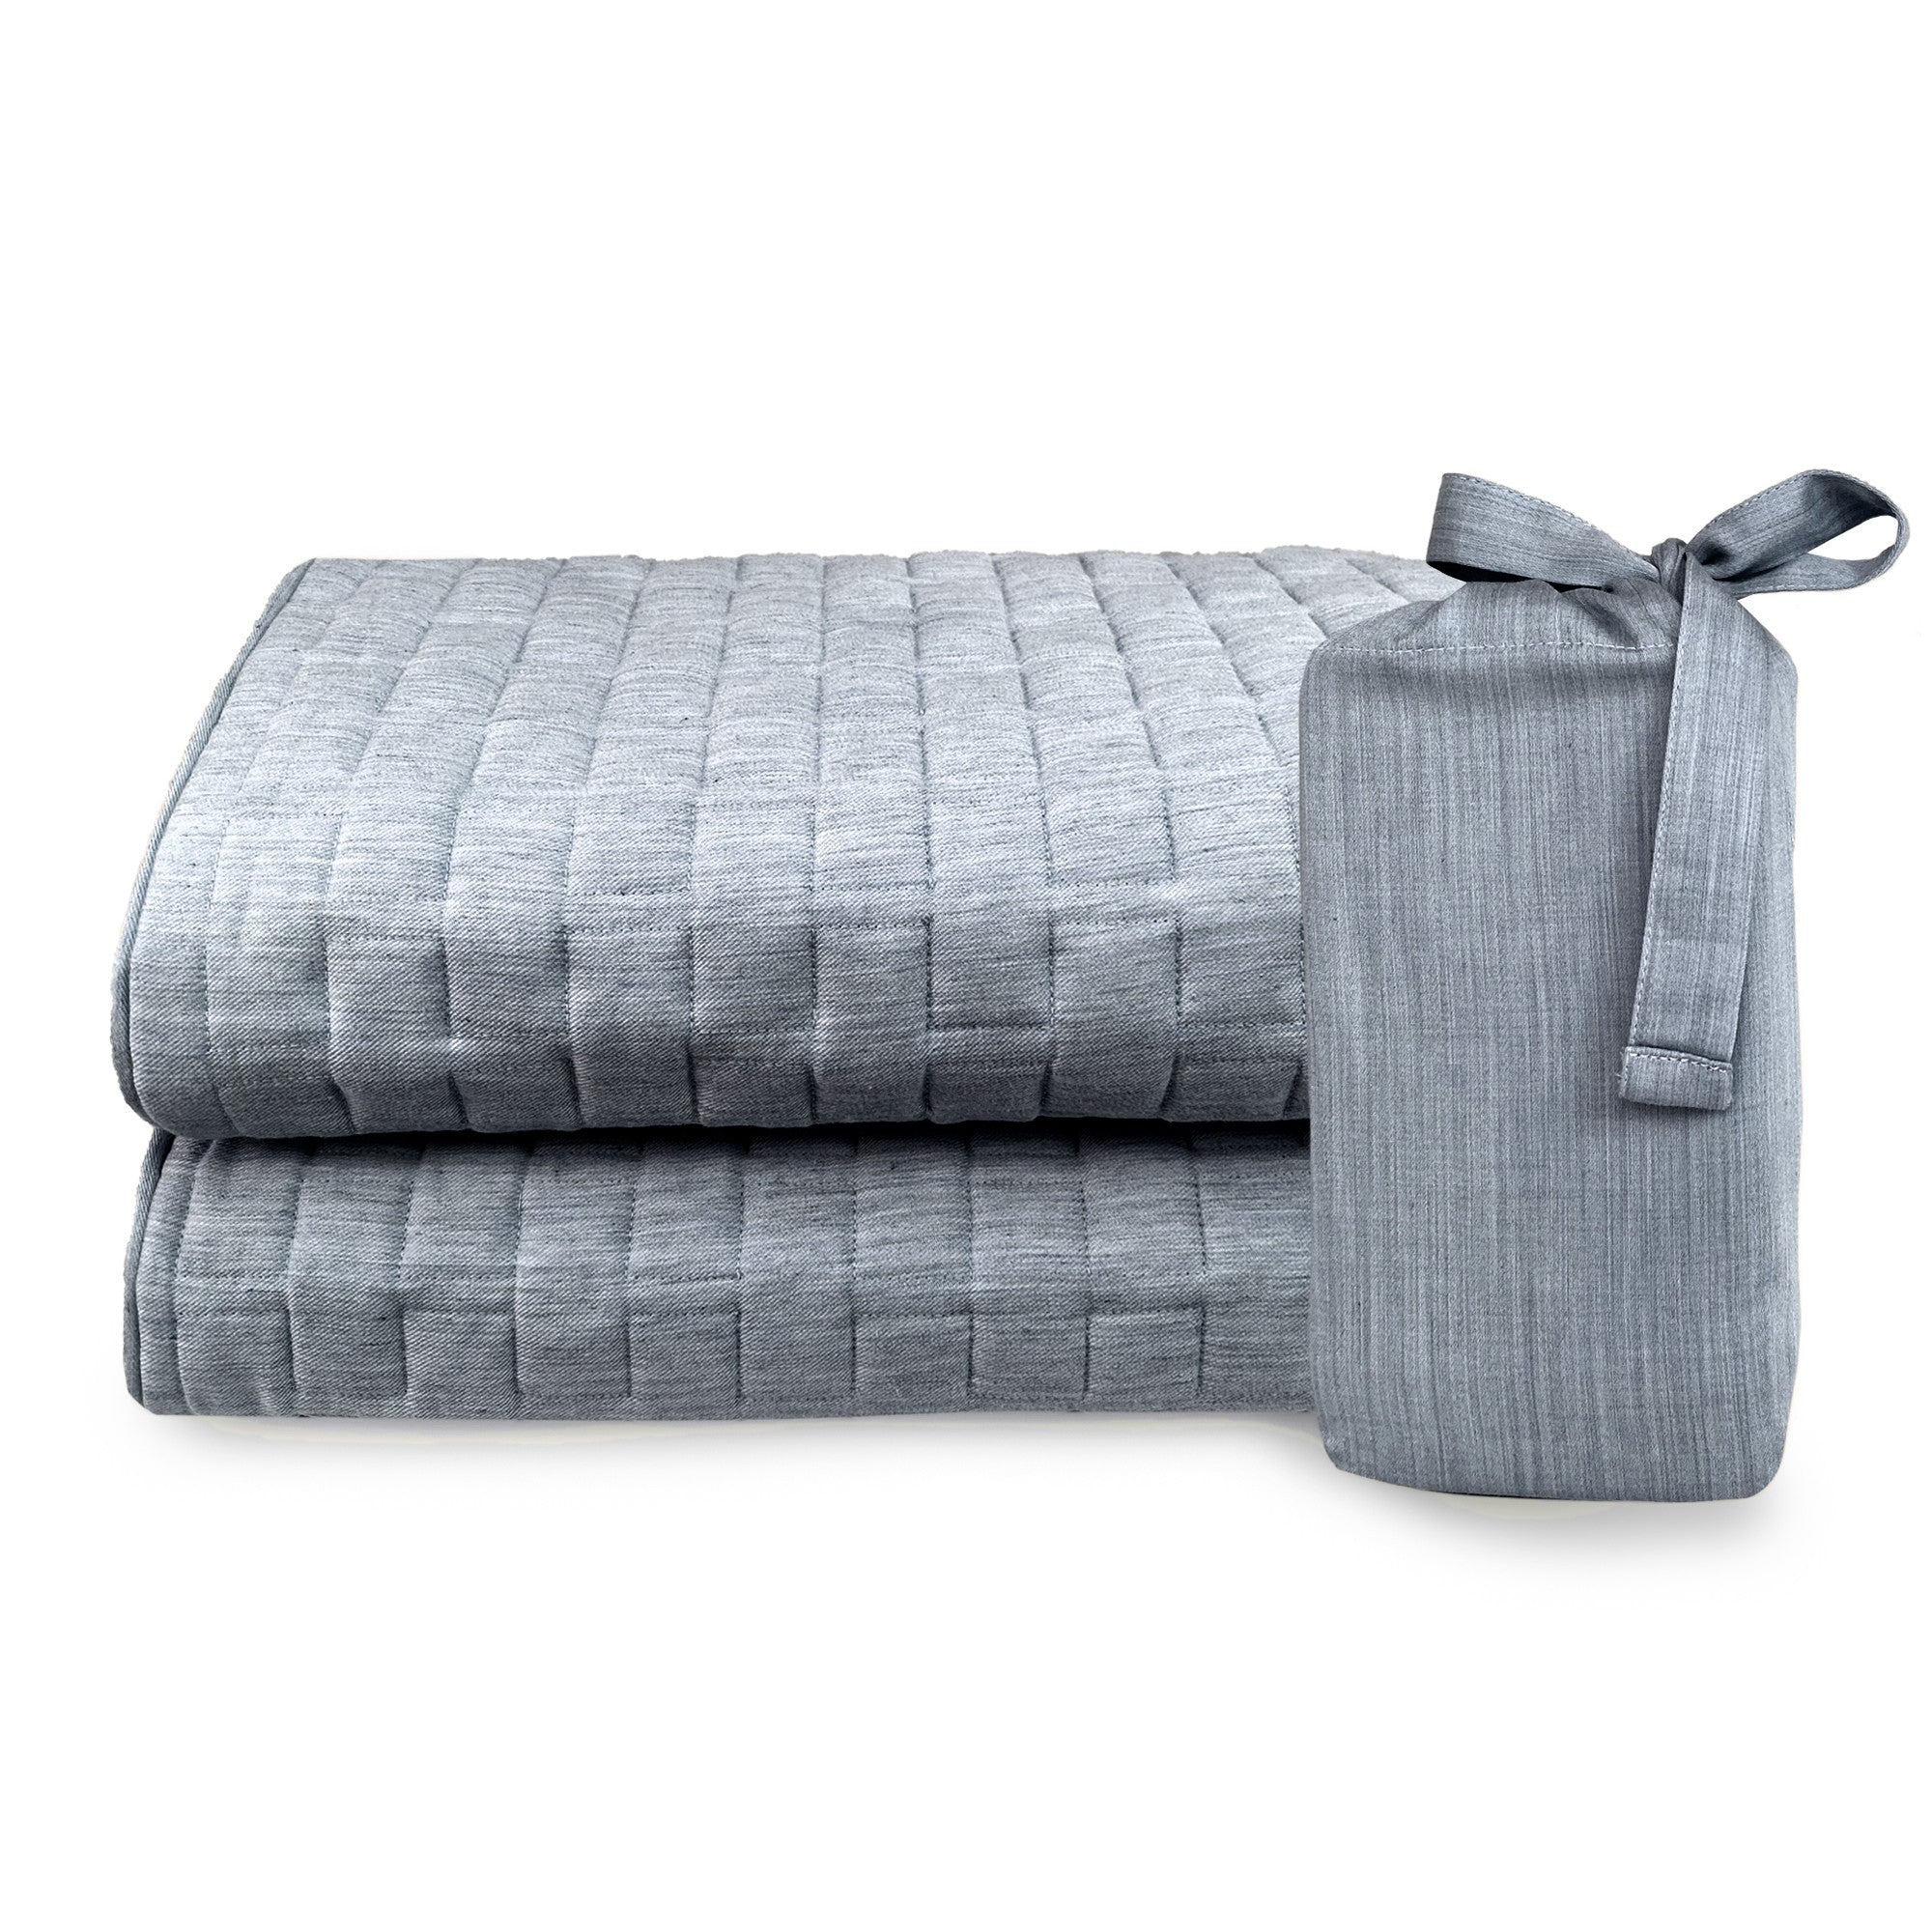 MELANGE Bamboo Quilted Standard Shams 2pack - Smooth Fibers, Good For Skin, Non Irritated - Made From Unique Blend of Viscose from Bamboo - Silver